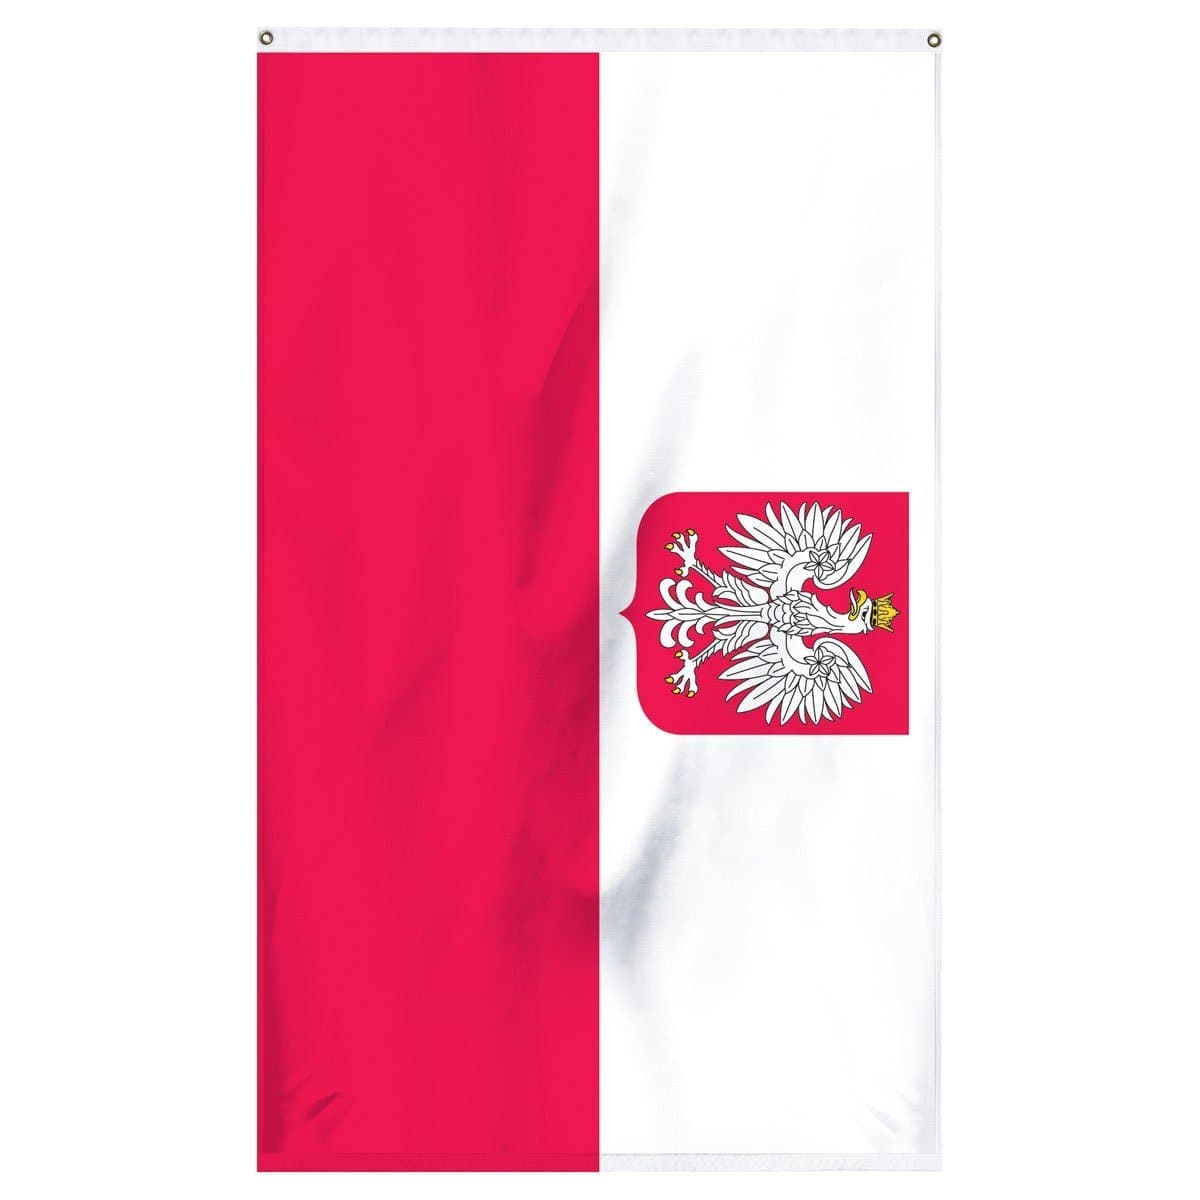 Poland State flag with Eagle emblem for sale to buy online